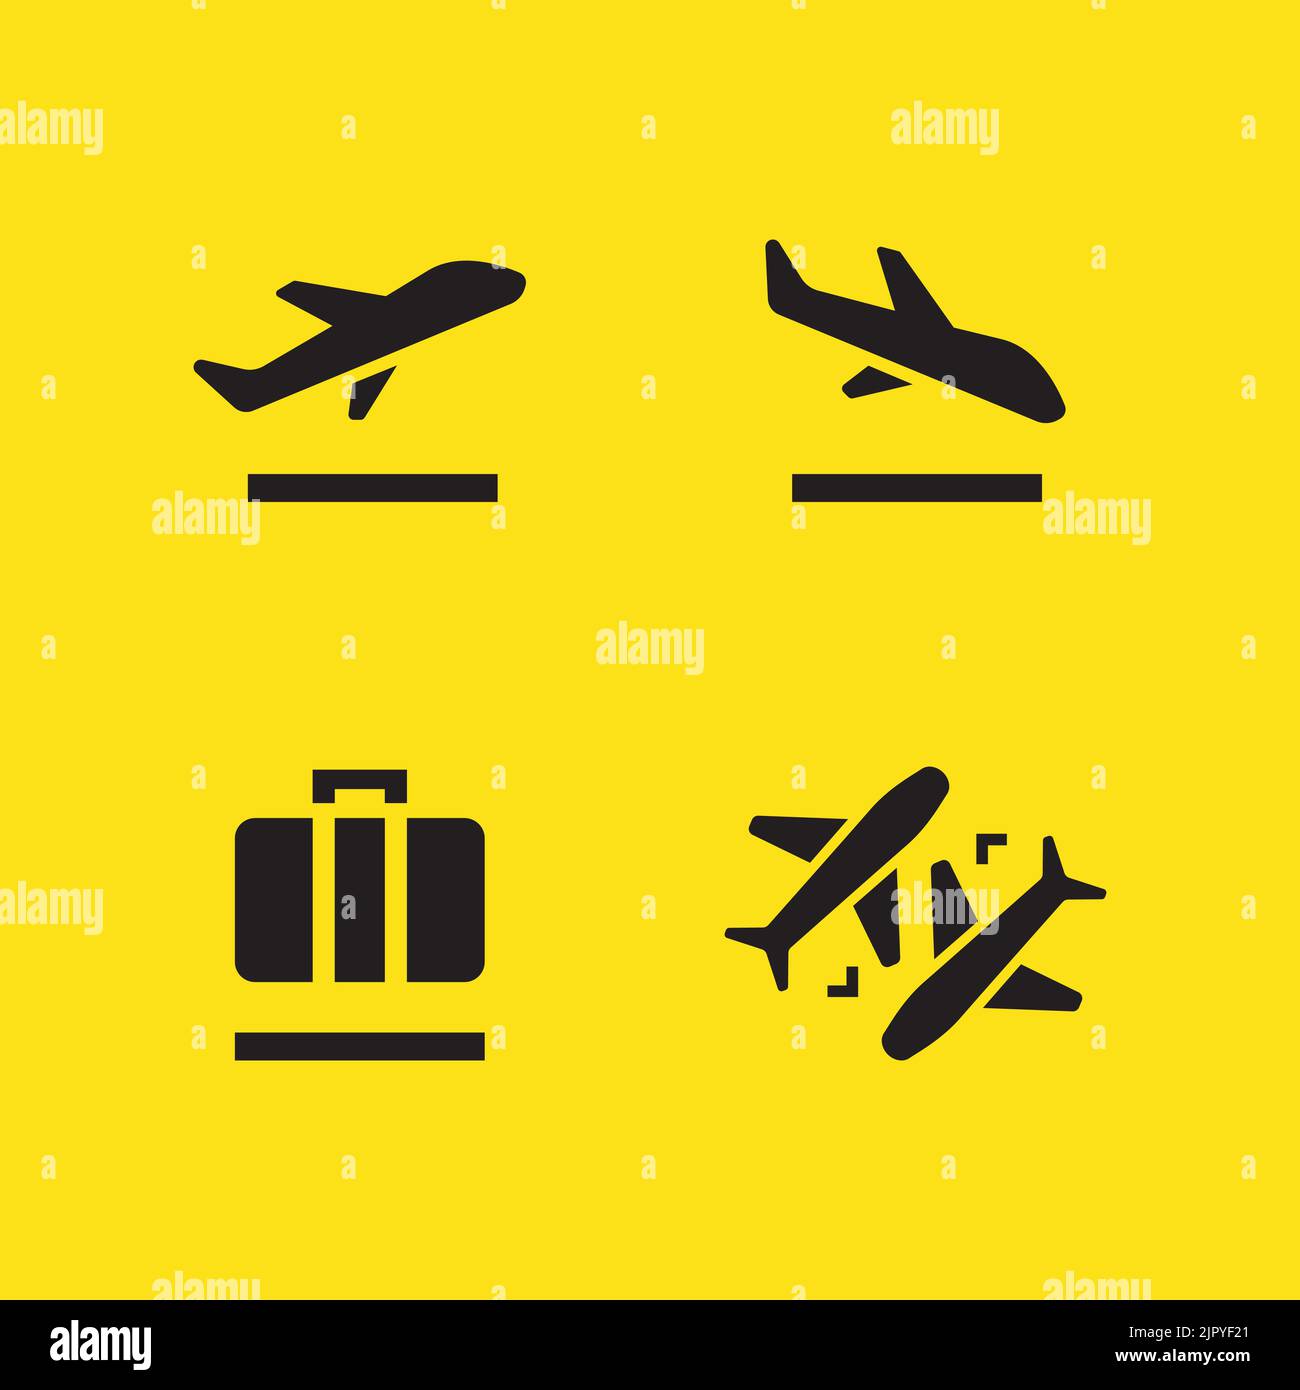 Airport icons set, departures, arrivals, baggage, transfer. vector Stock Vector